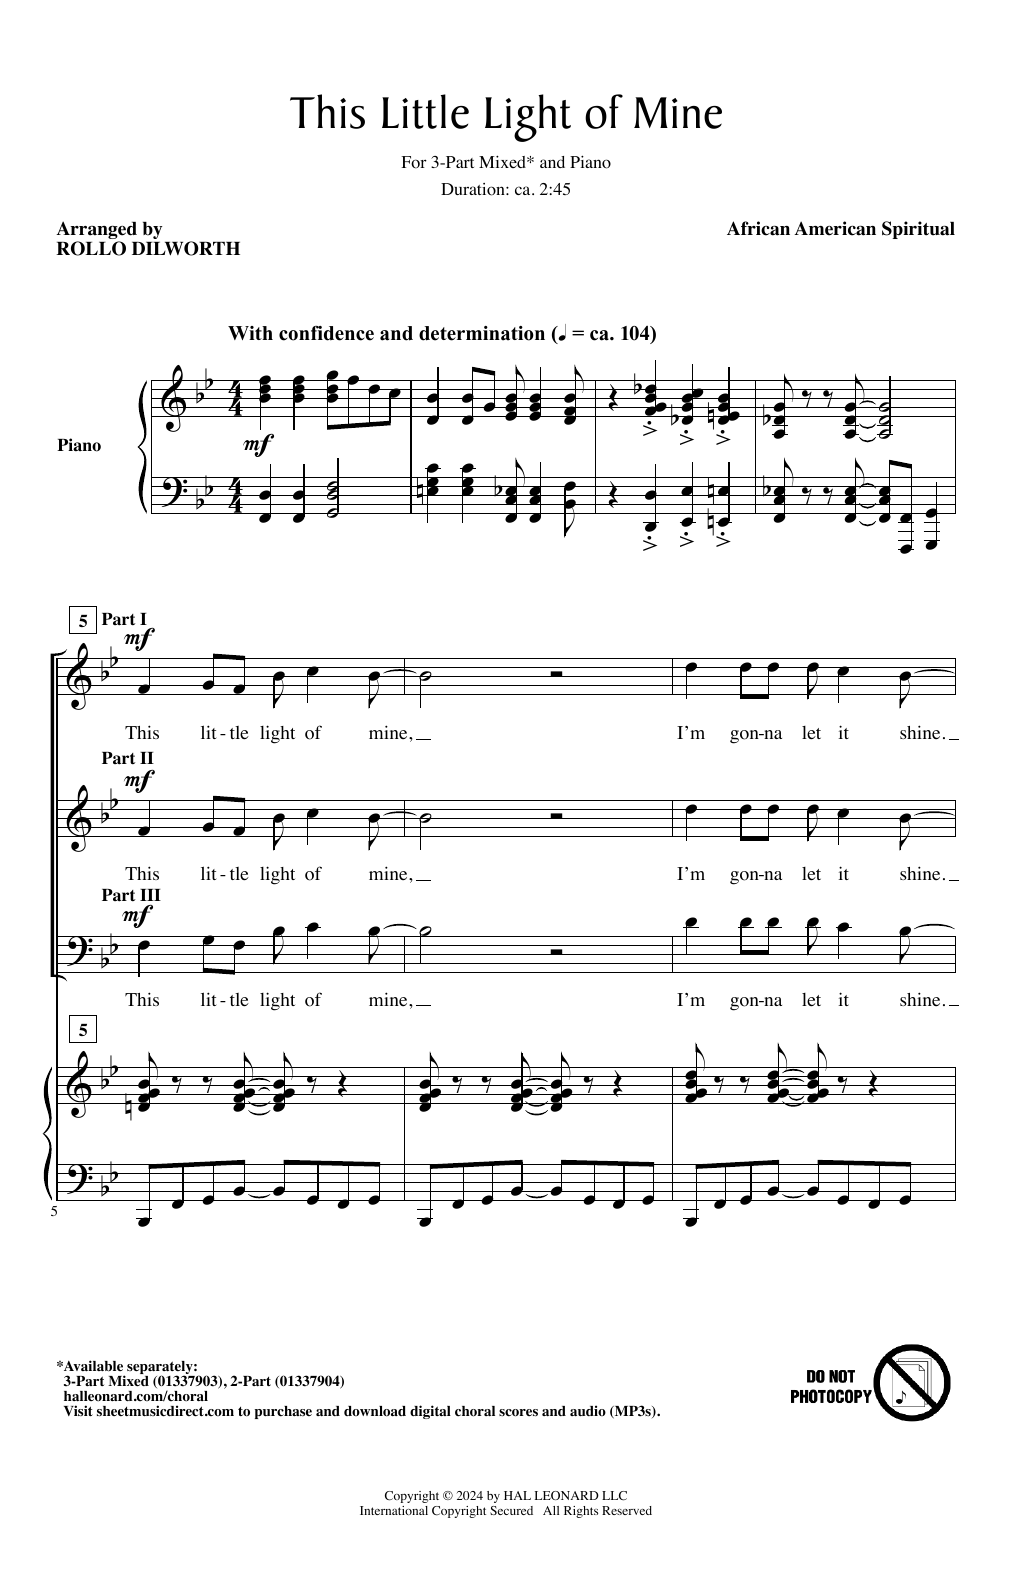 African-American Spiritual This Little Light Of Mine (arr. Rollo Dilworth) sheet music notes printable PDF score